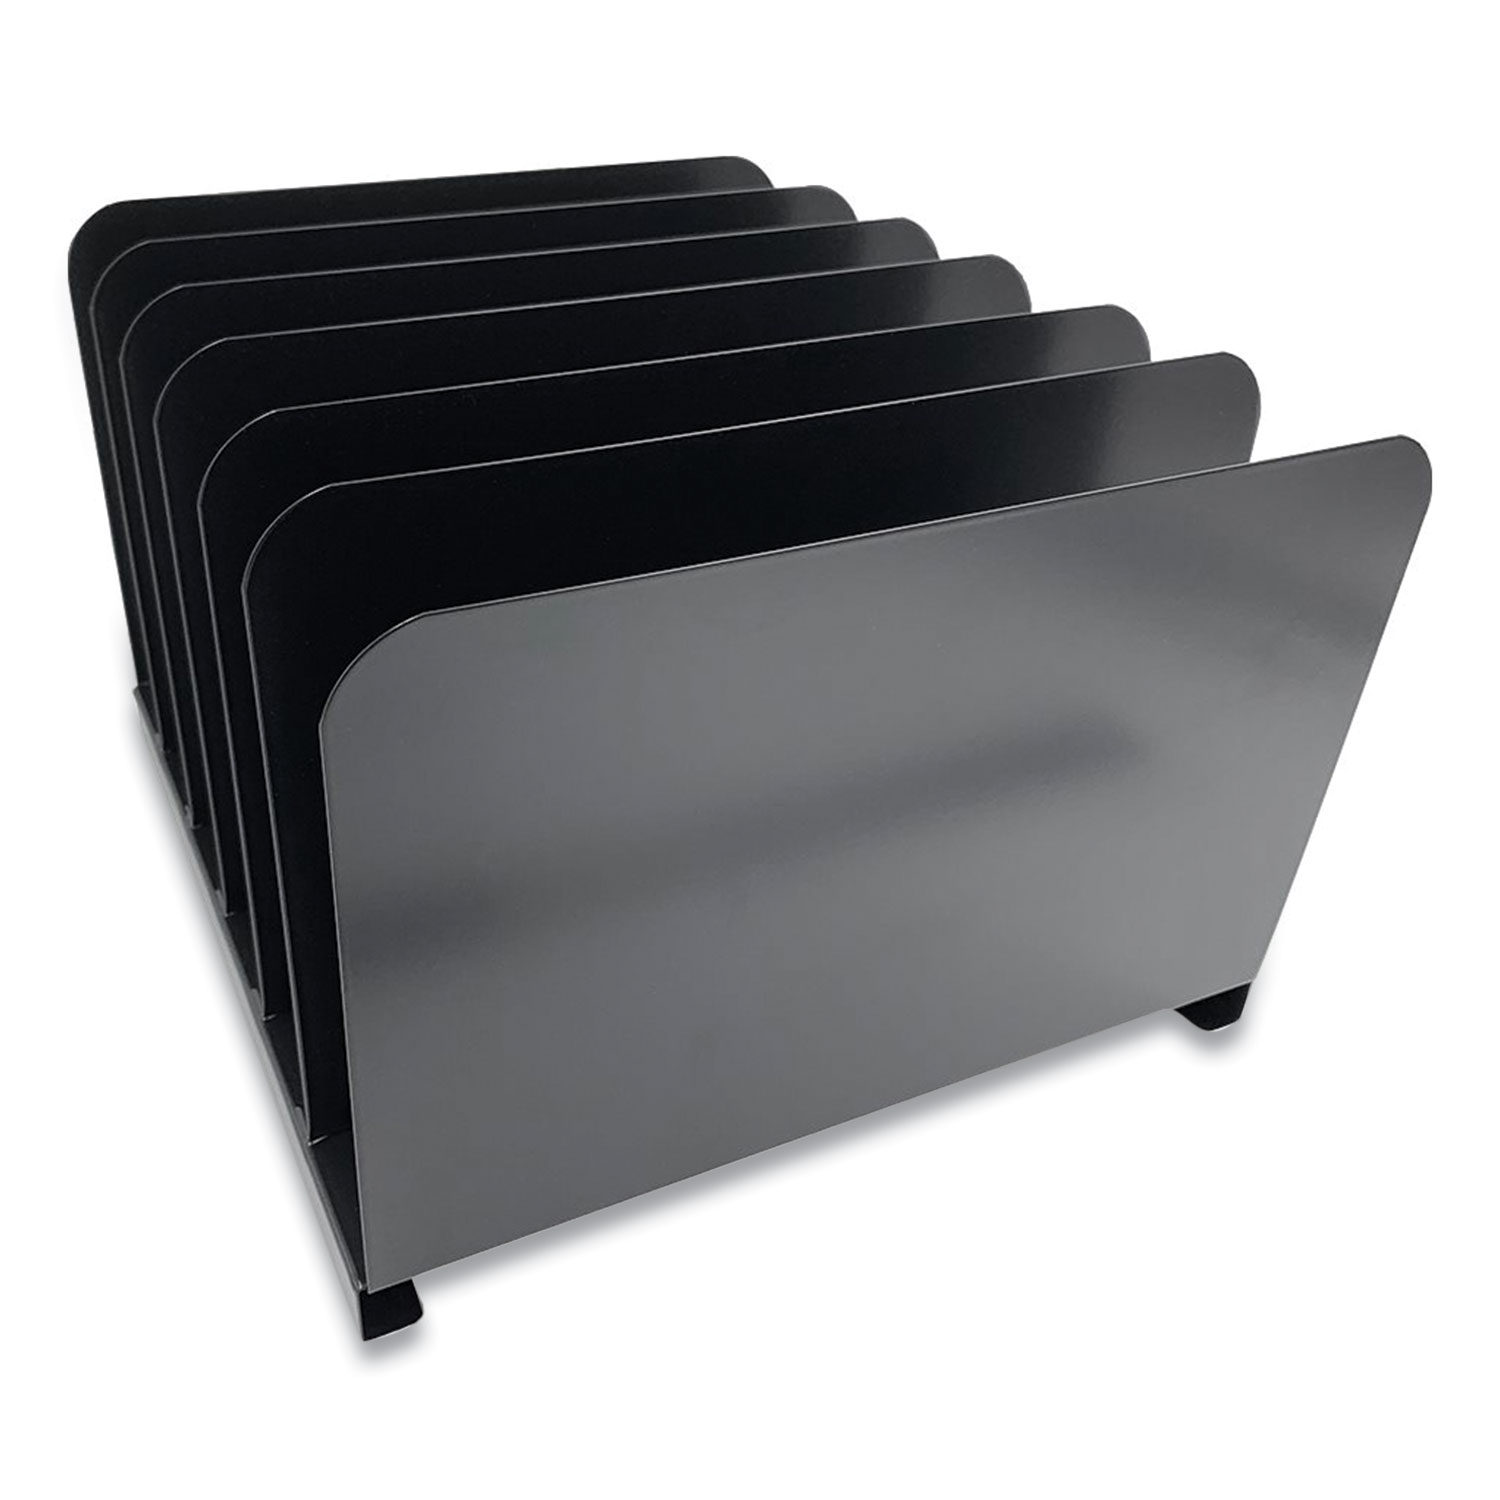 Huron Steel Vertical File Organizer, 6 Sections, Letter Size Files, 11 x 12 x 8, Black